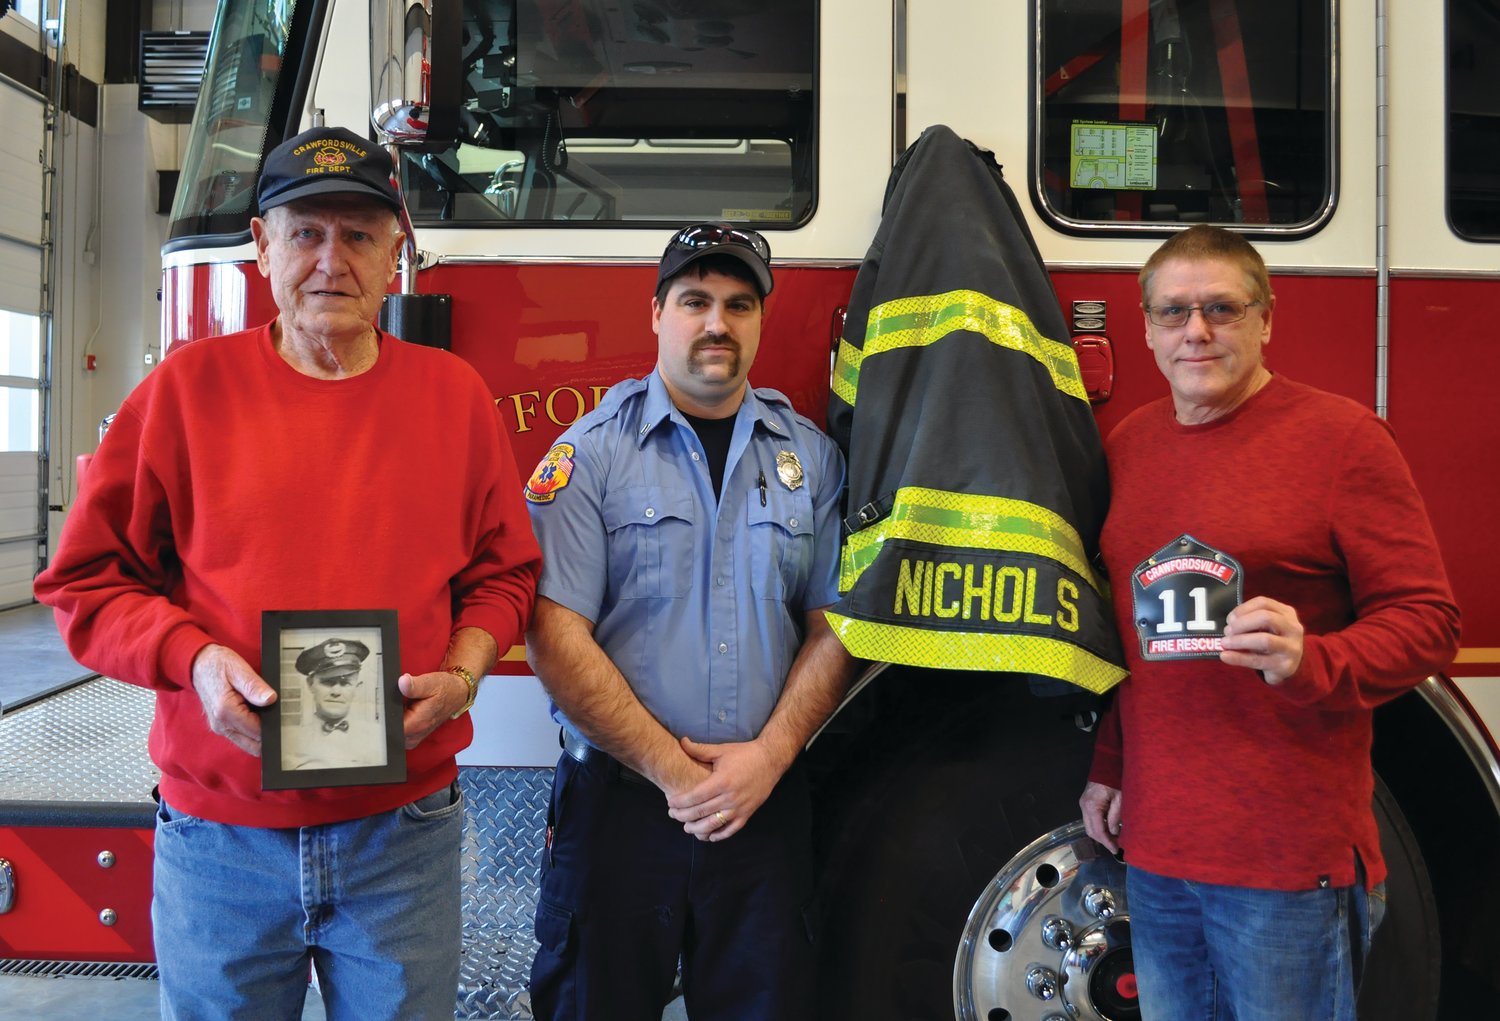 Seth Nichols, second from left, poses with his uncle, Brad Nichols, right, and grandfather, Richard Nichols, who is holding a picture of Seth’s great-grandfather Elijah Nichols.